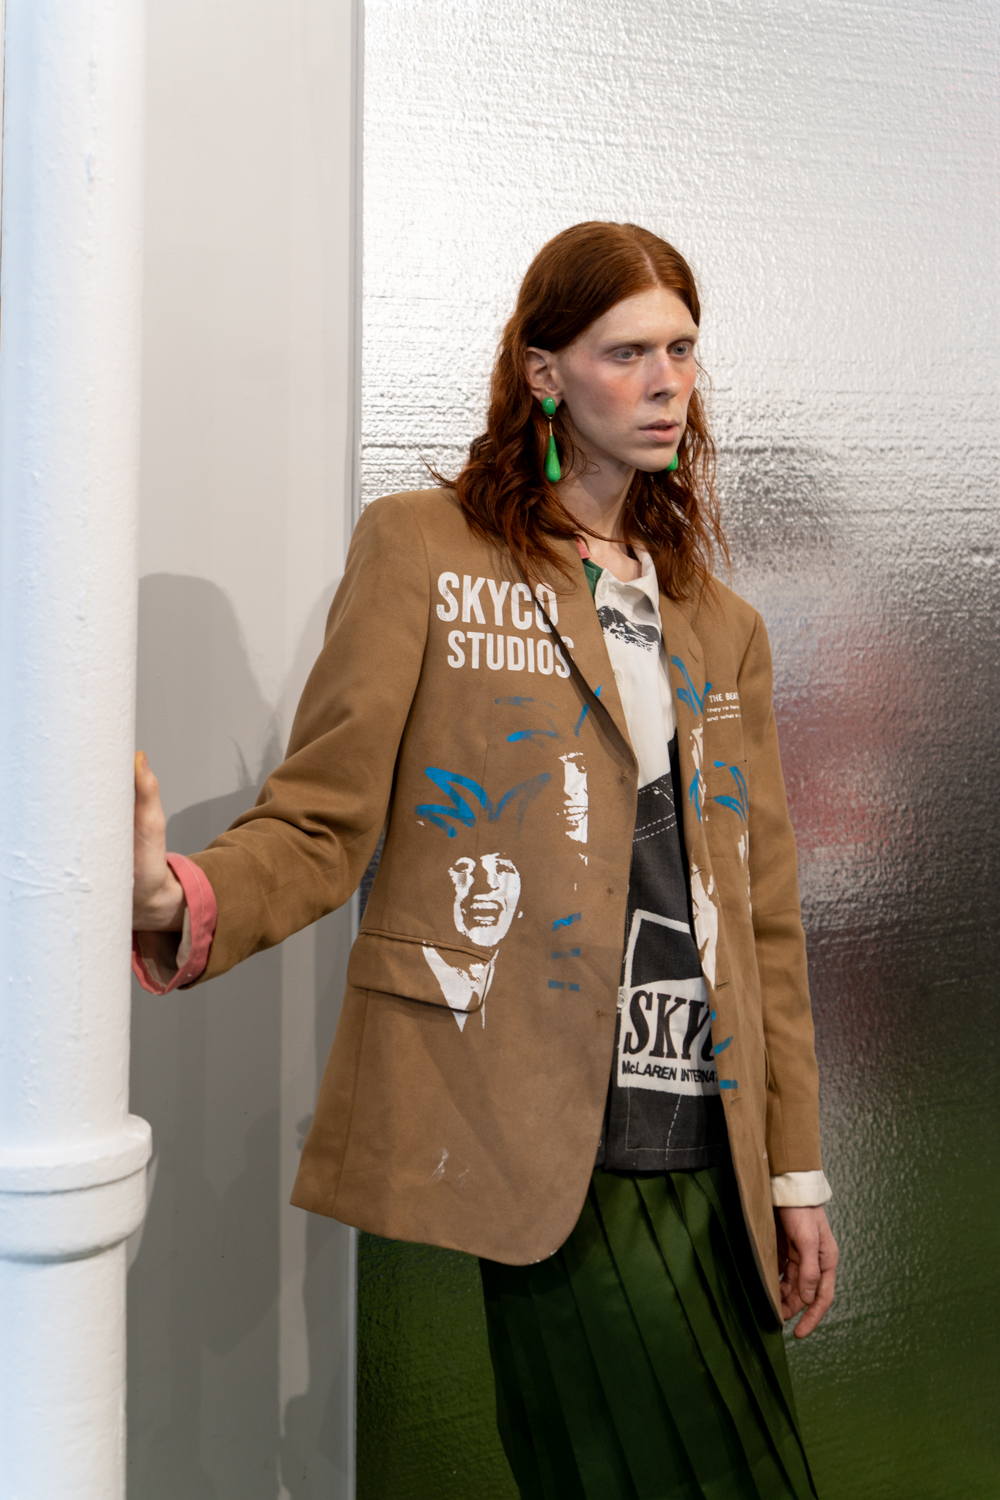 A model stands in a fashion showroom with reflective cardboard behind them. The model is wearing a brown linen jacket with printed patterns and a green dress. The clothing is from the brand Skyco.